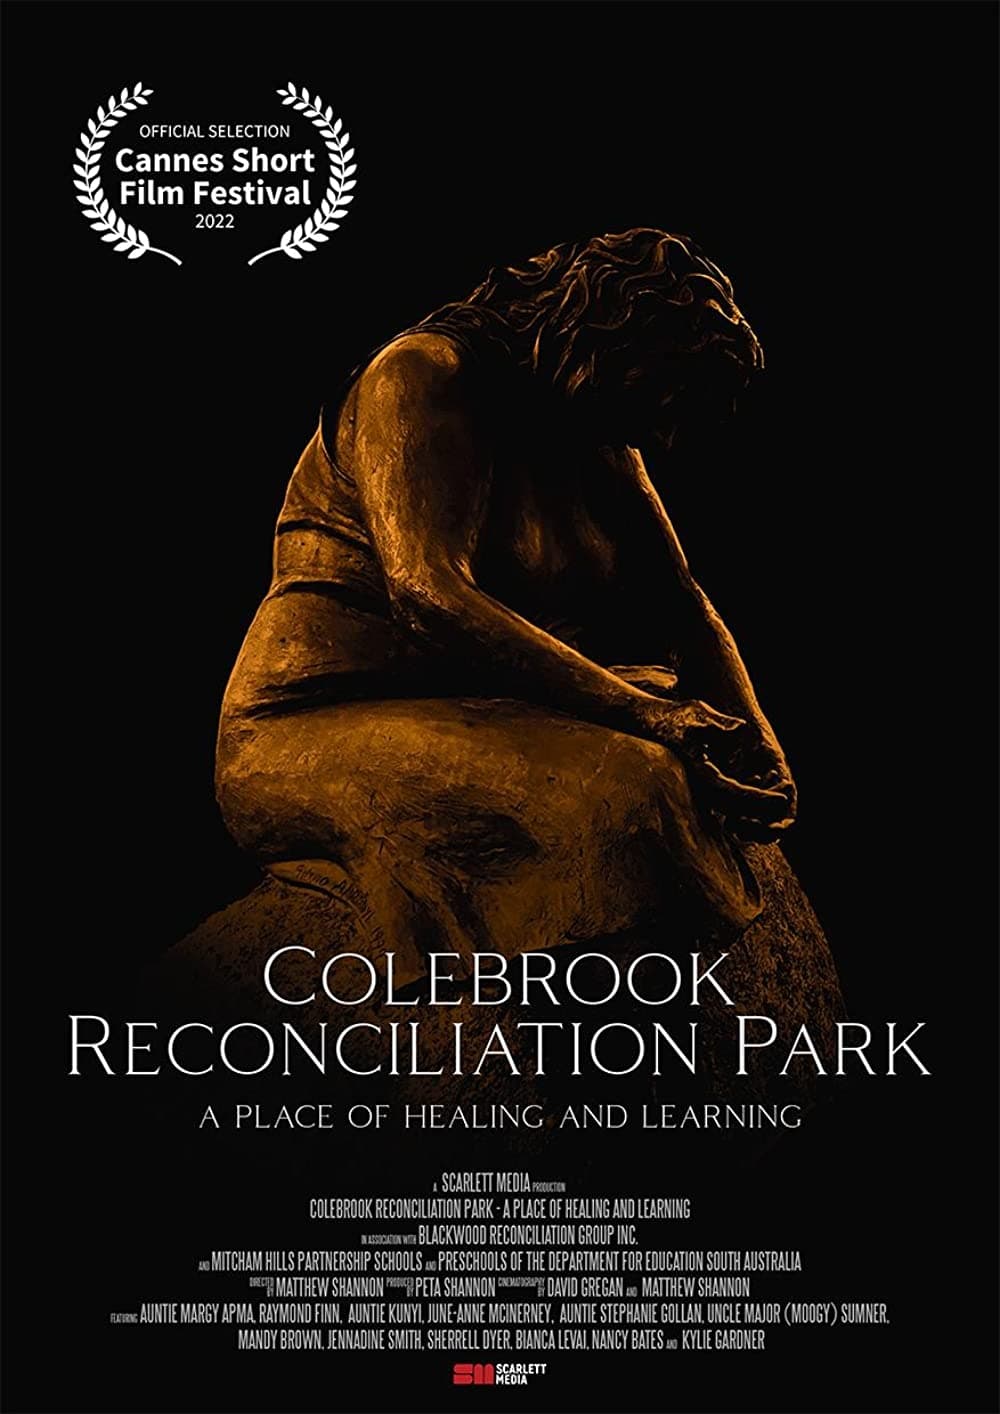 Colebrook: A Place of Healing & Learning